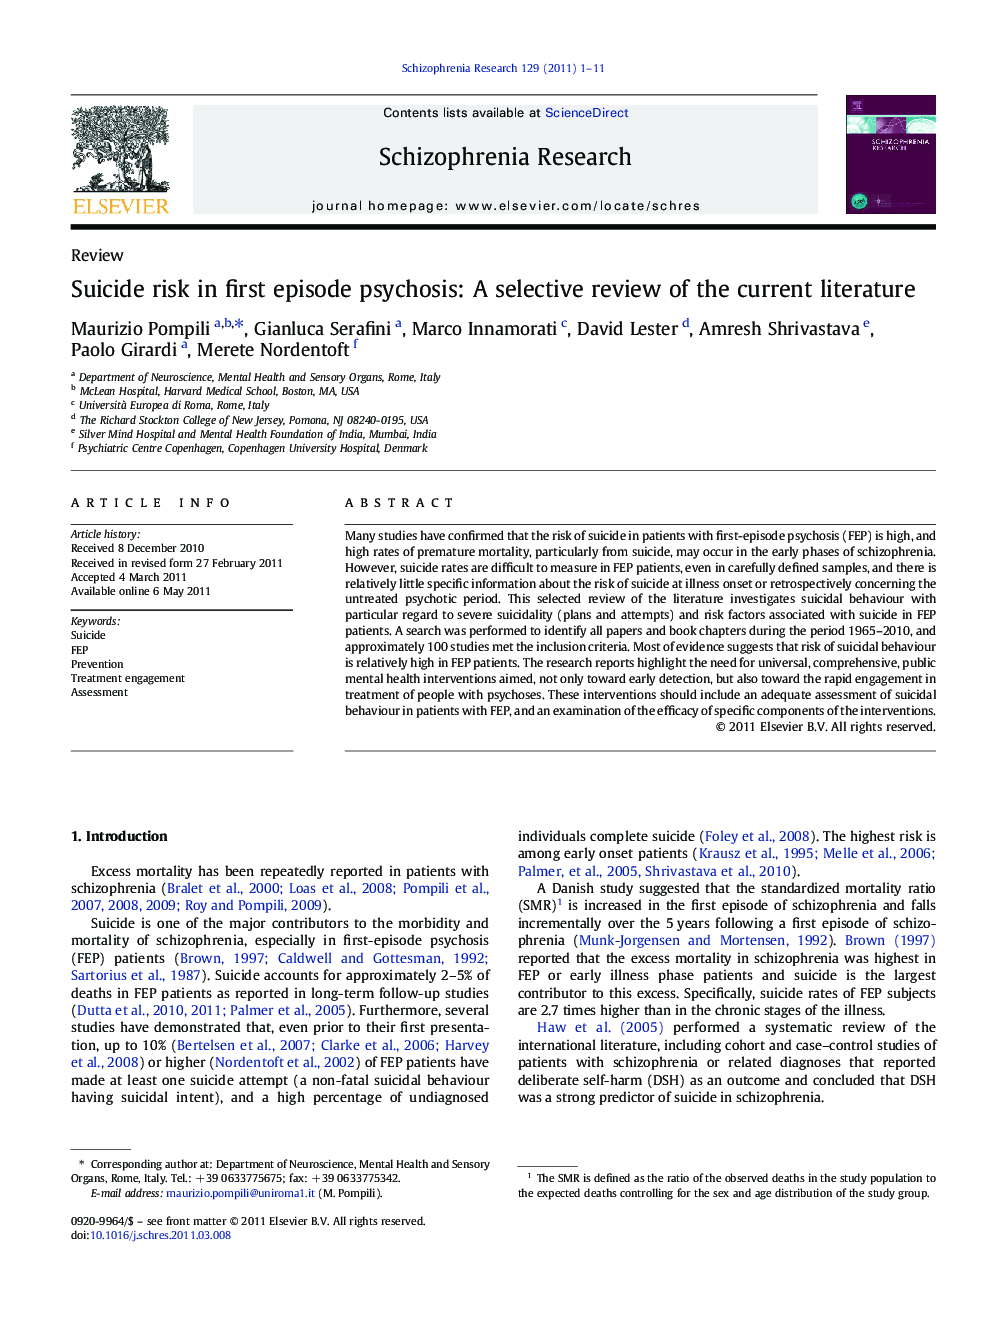 Suicide risk in first episode psychosis: A selective review of the current literature